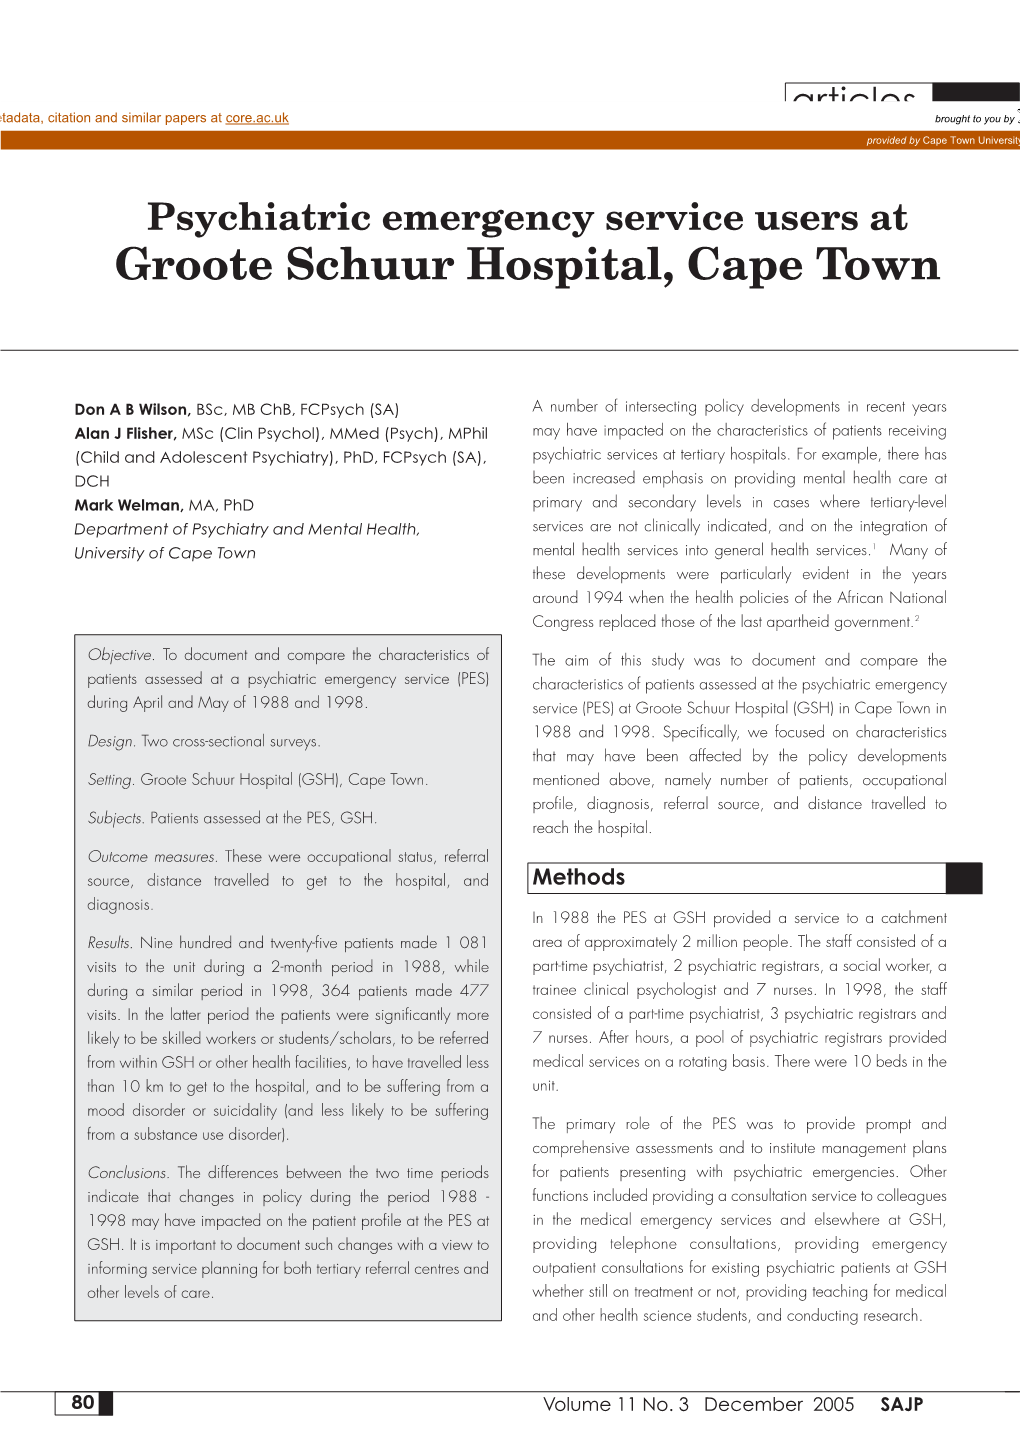 Groote Schuur Hospital, Cape Town